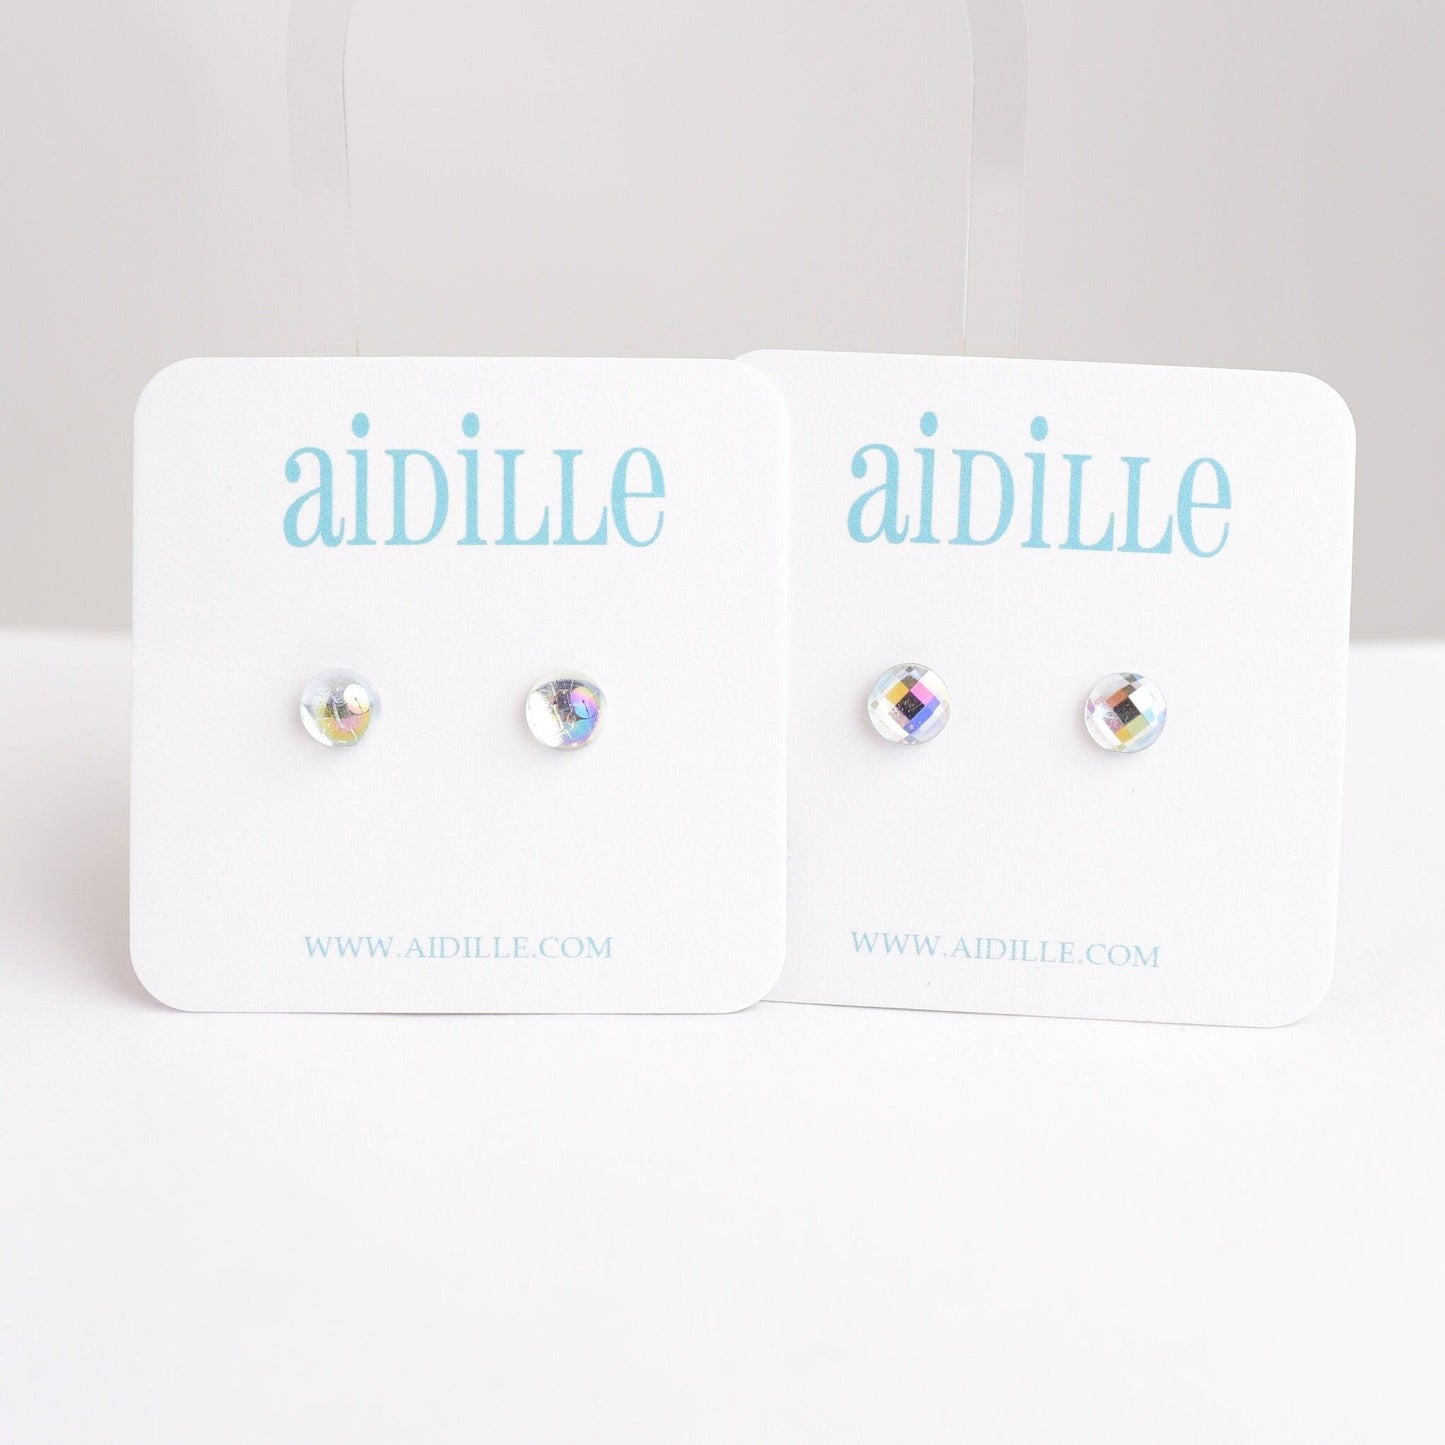 Resin Crystal Mini Lightweight Earrings with Titanium Posts- Smooth or Faceted